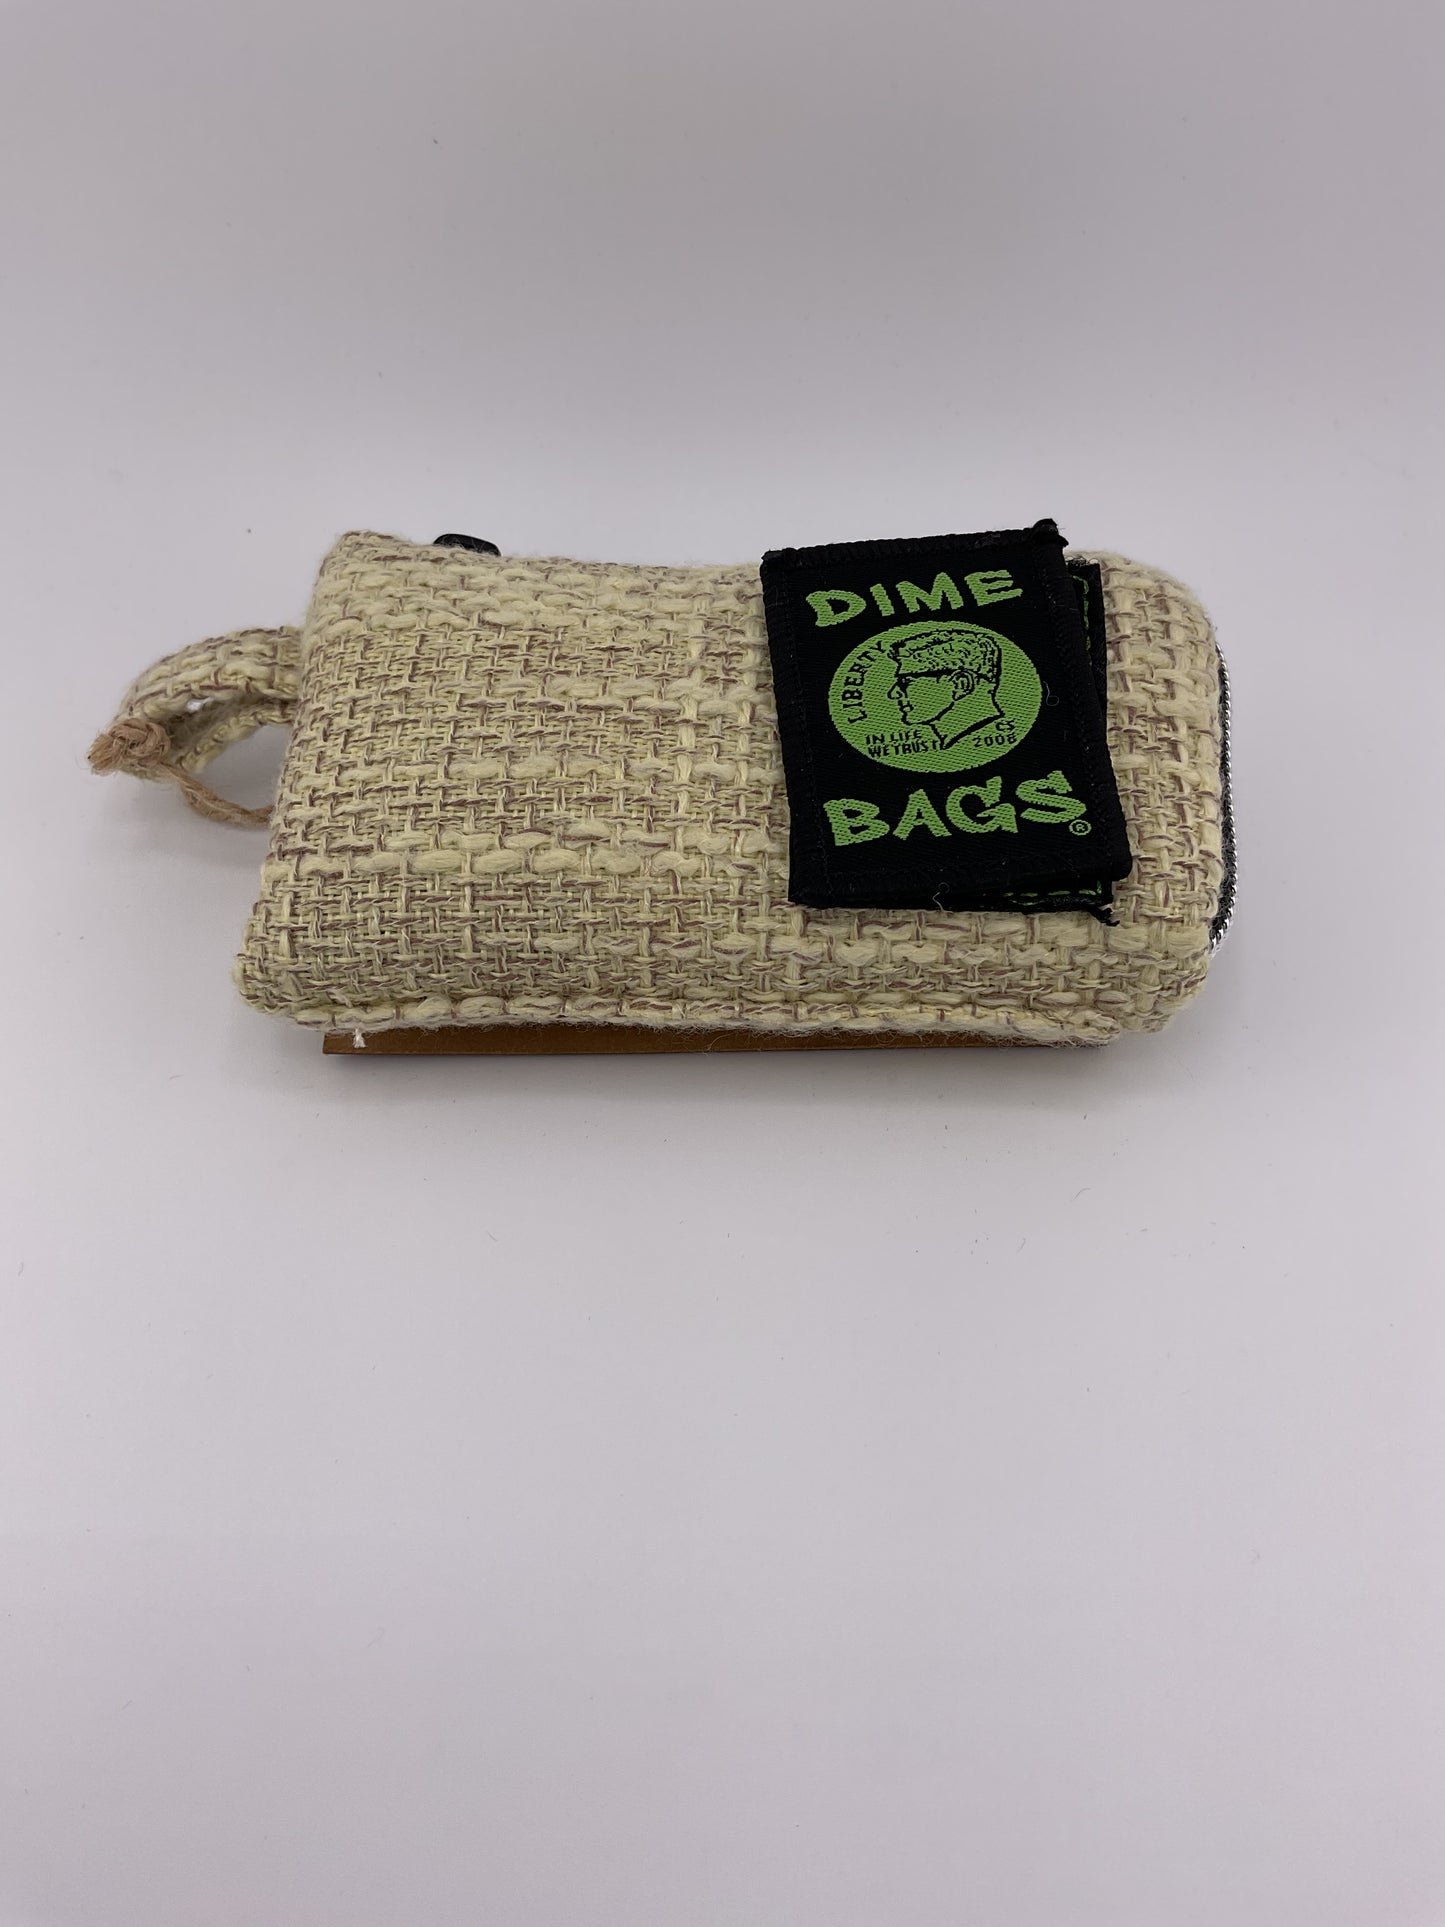 Dime Bags Pouch 5 inch